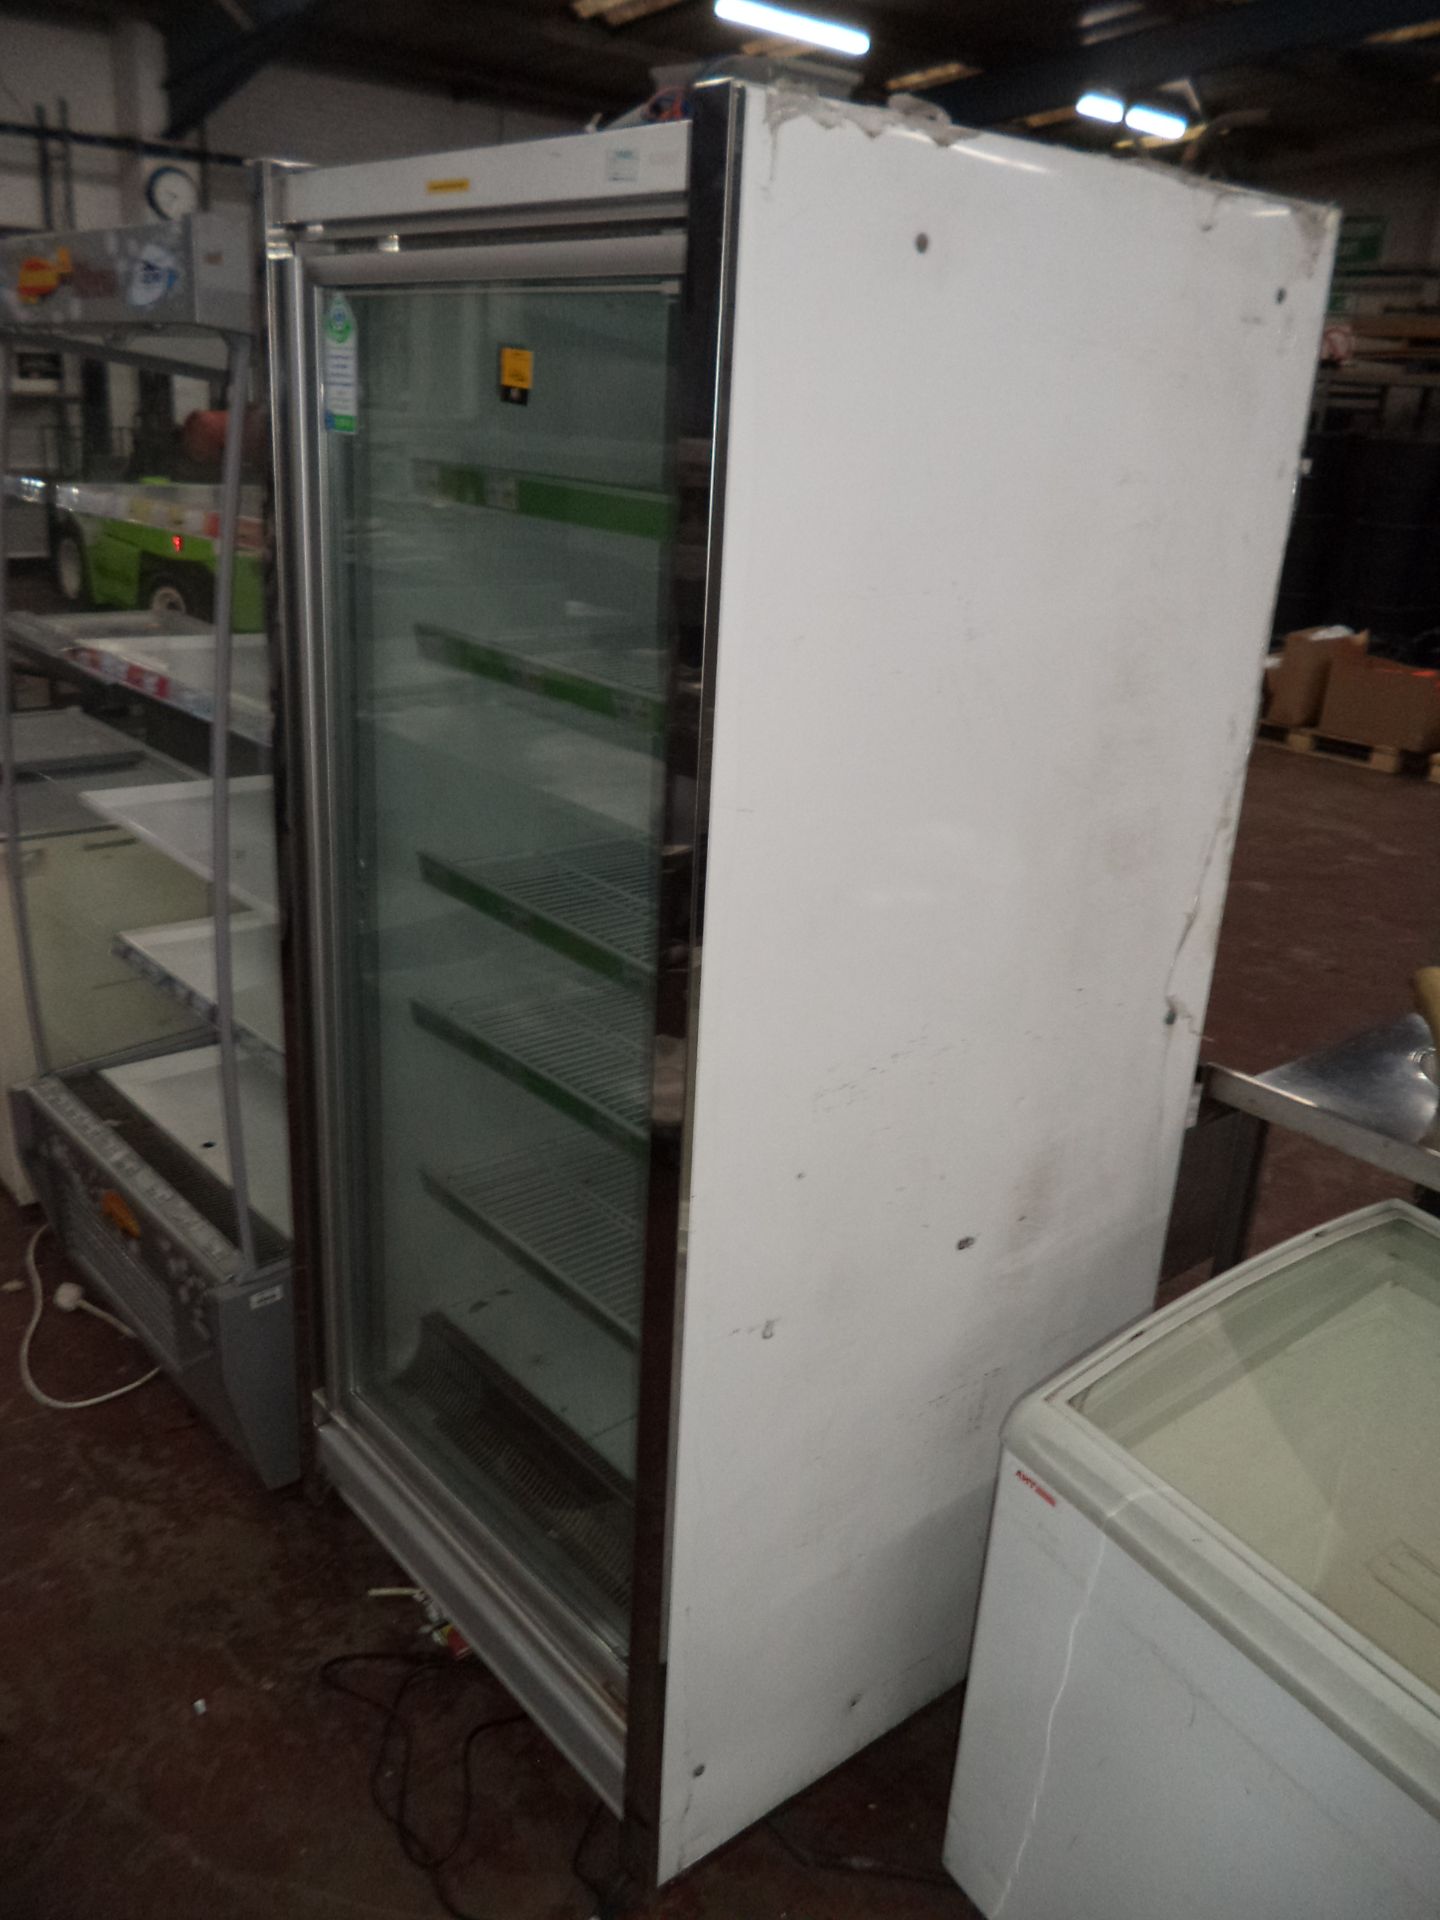 Larged clear door freezer - believed to require an external condenser unit IMPORTANT: Please